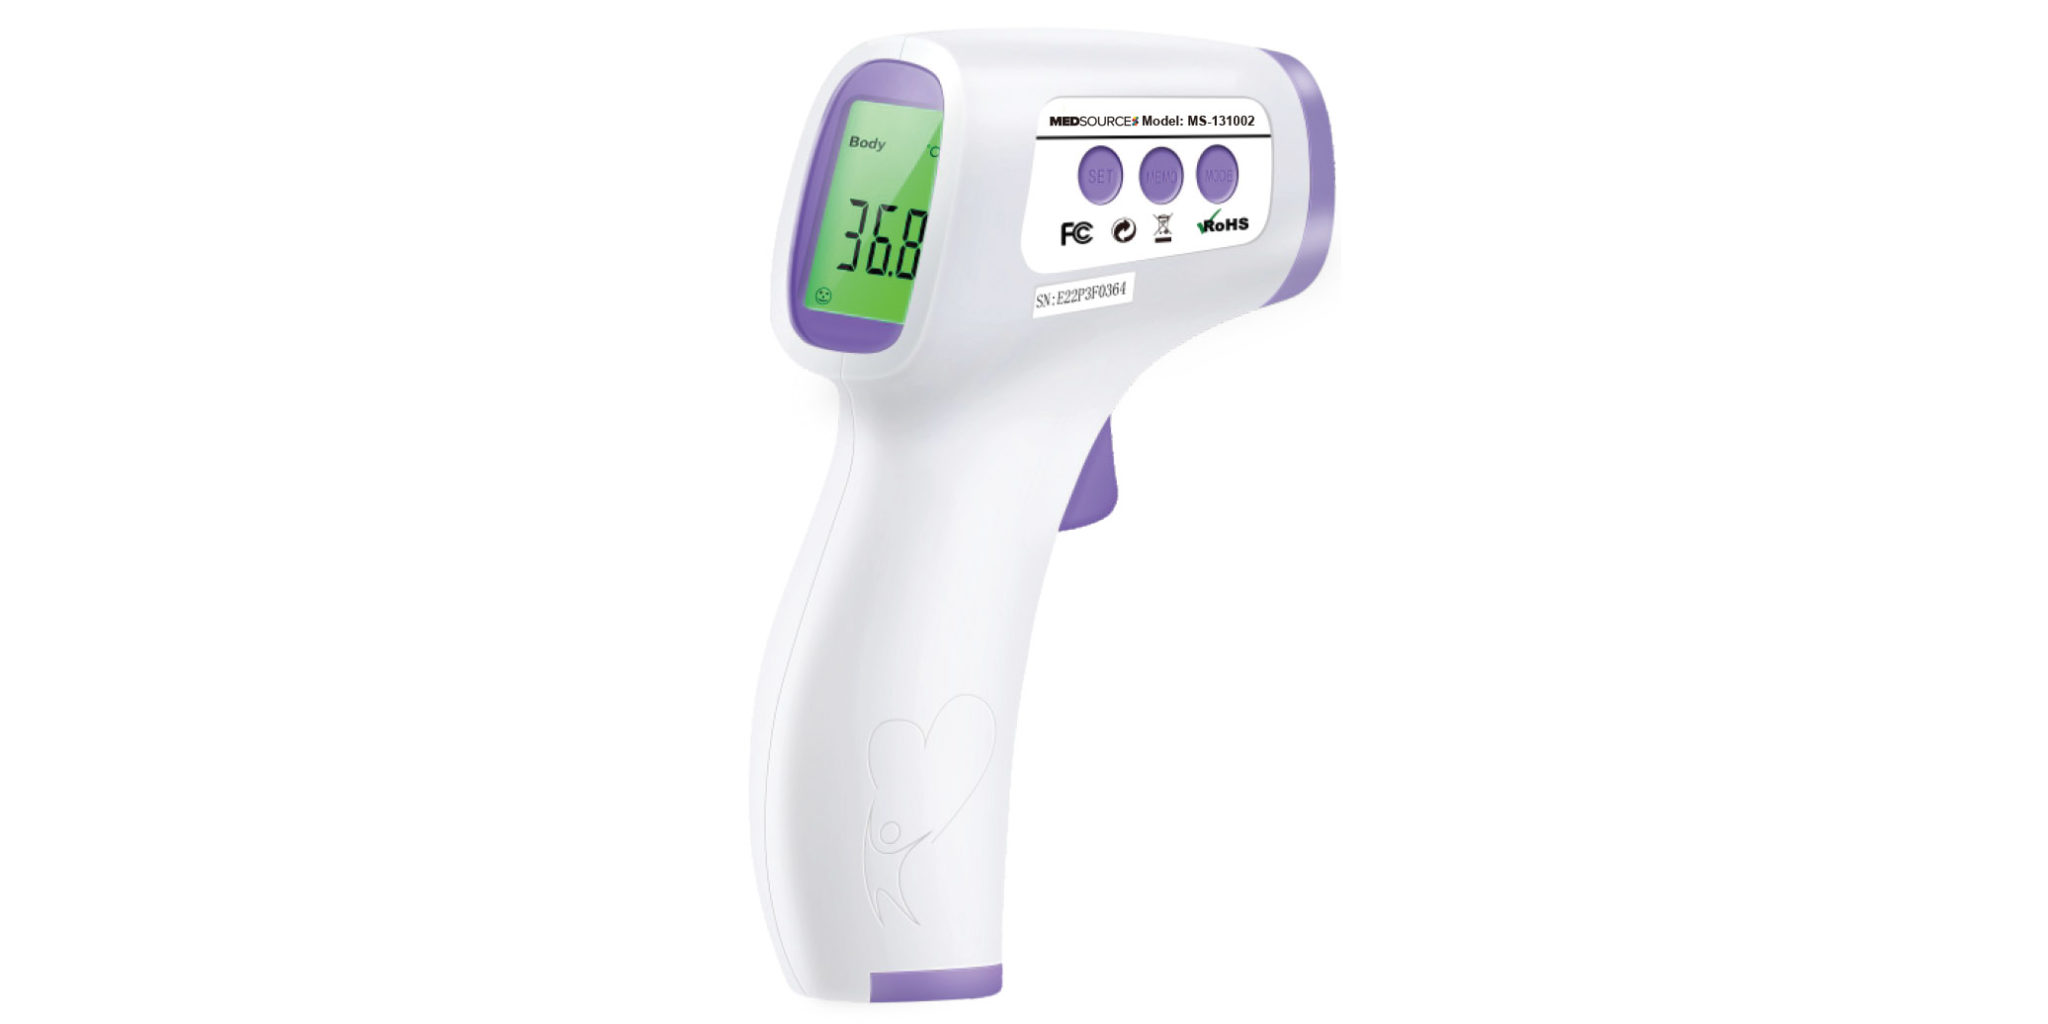 GM550 red non-contact thermometer Fesjoy Infrared Thermometer Handheld Infrared Thermometer shipped without battery 